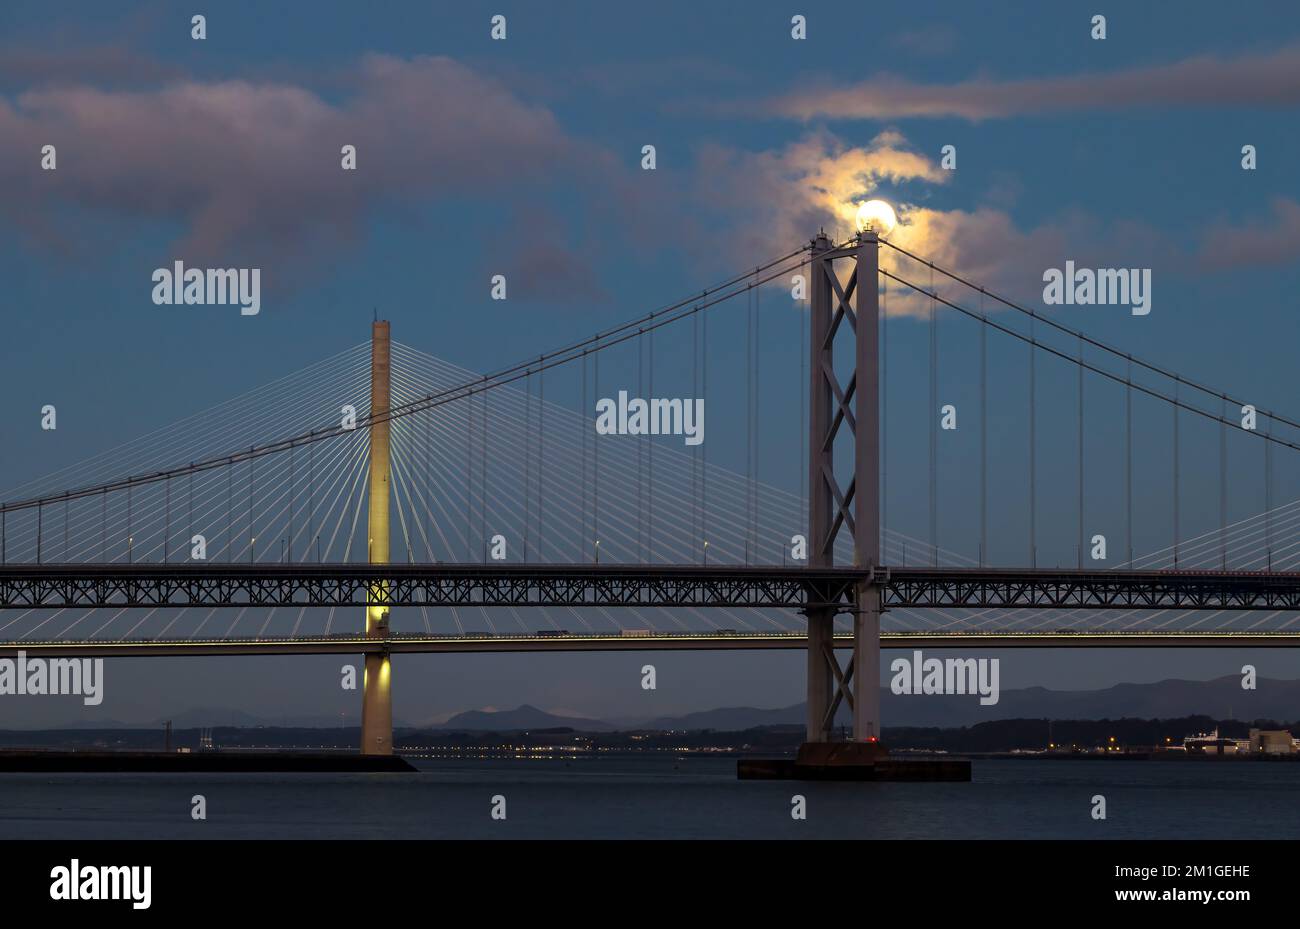 A full moon sets over Queensferry Crossing and Forth Road bridges in blue hour, Firth of Forth, Scotland, UK Stock Photo